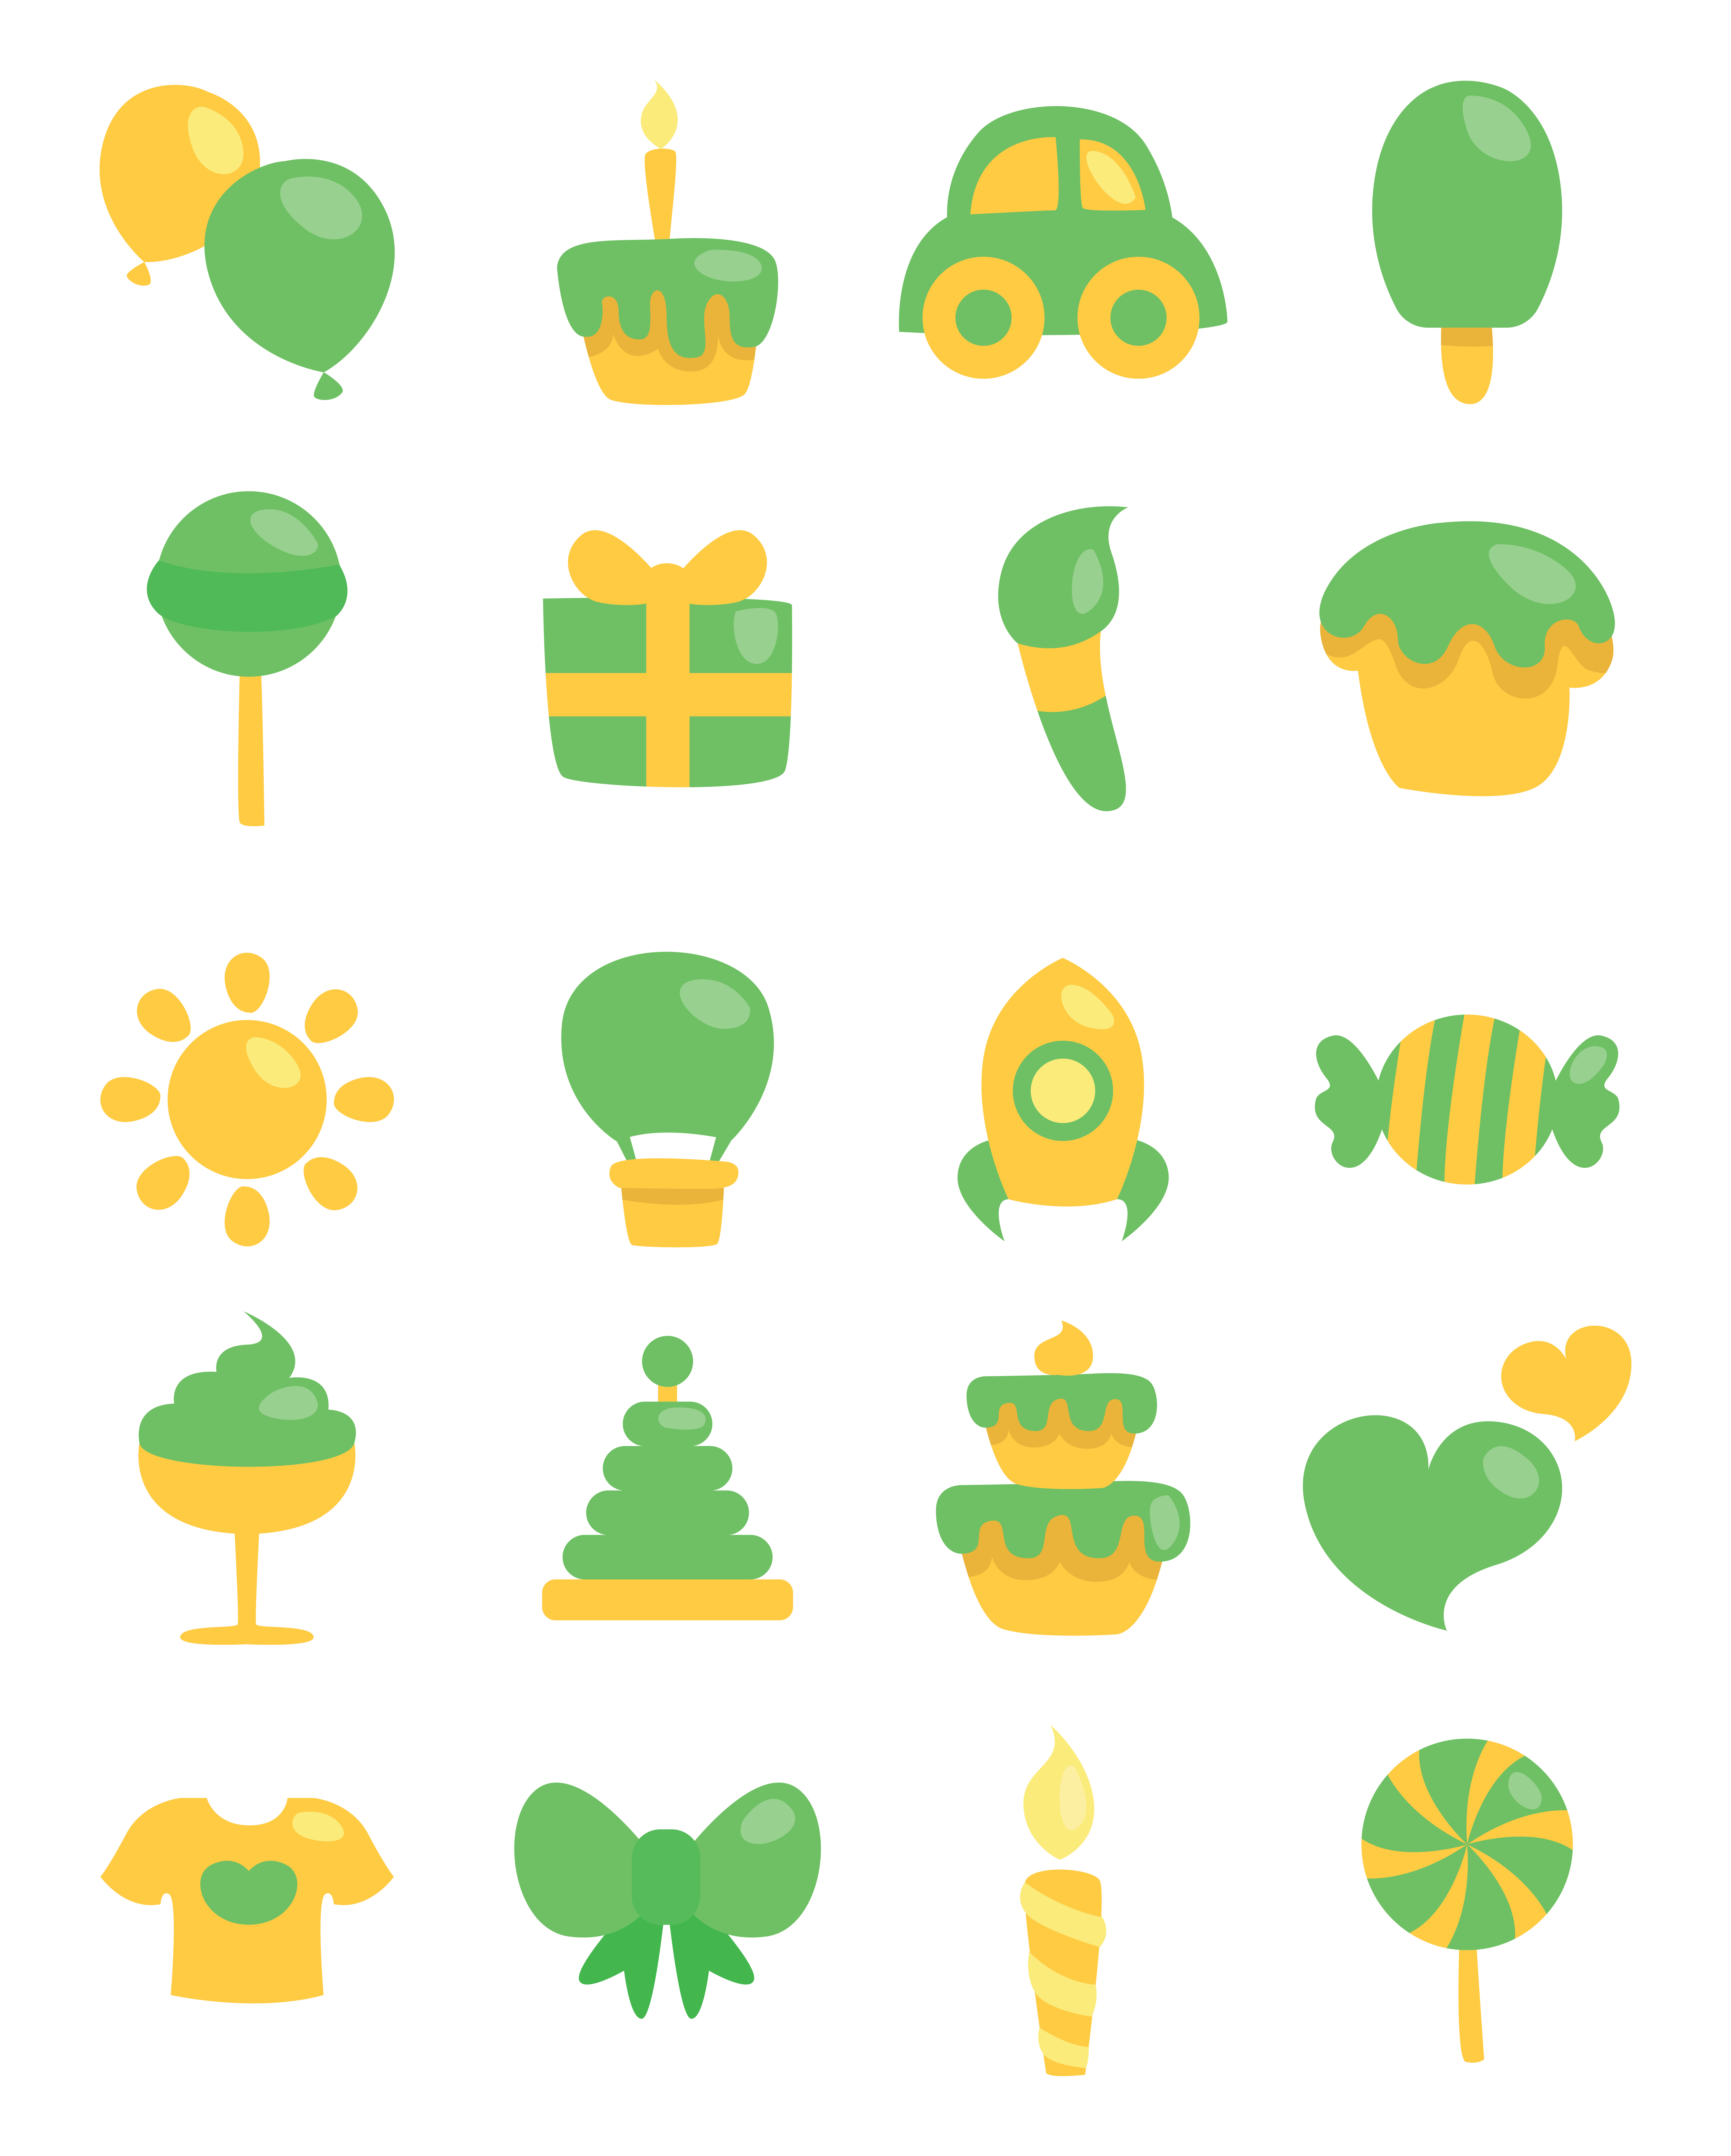 Bunch of green and yellow items on a white background.